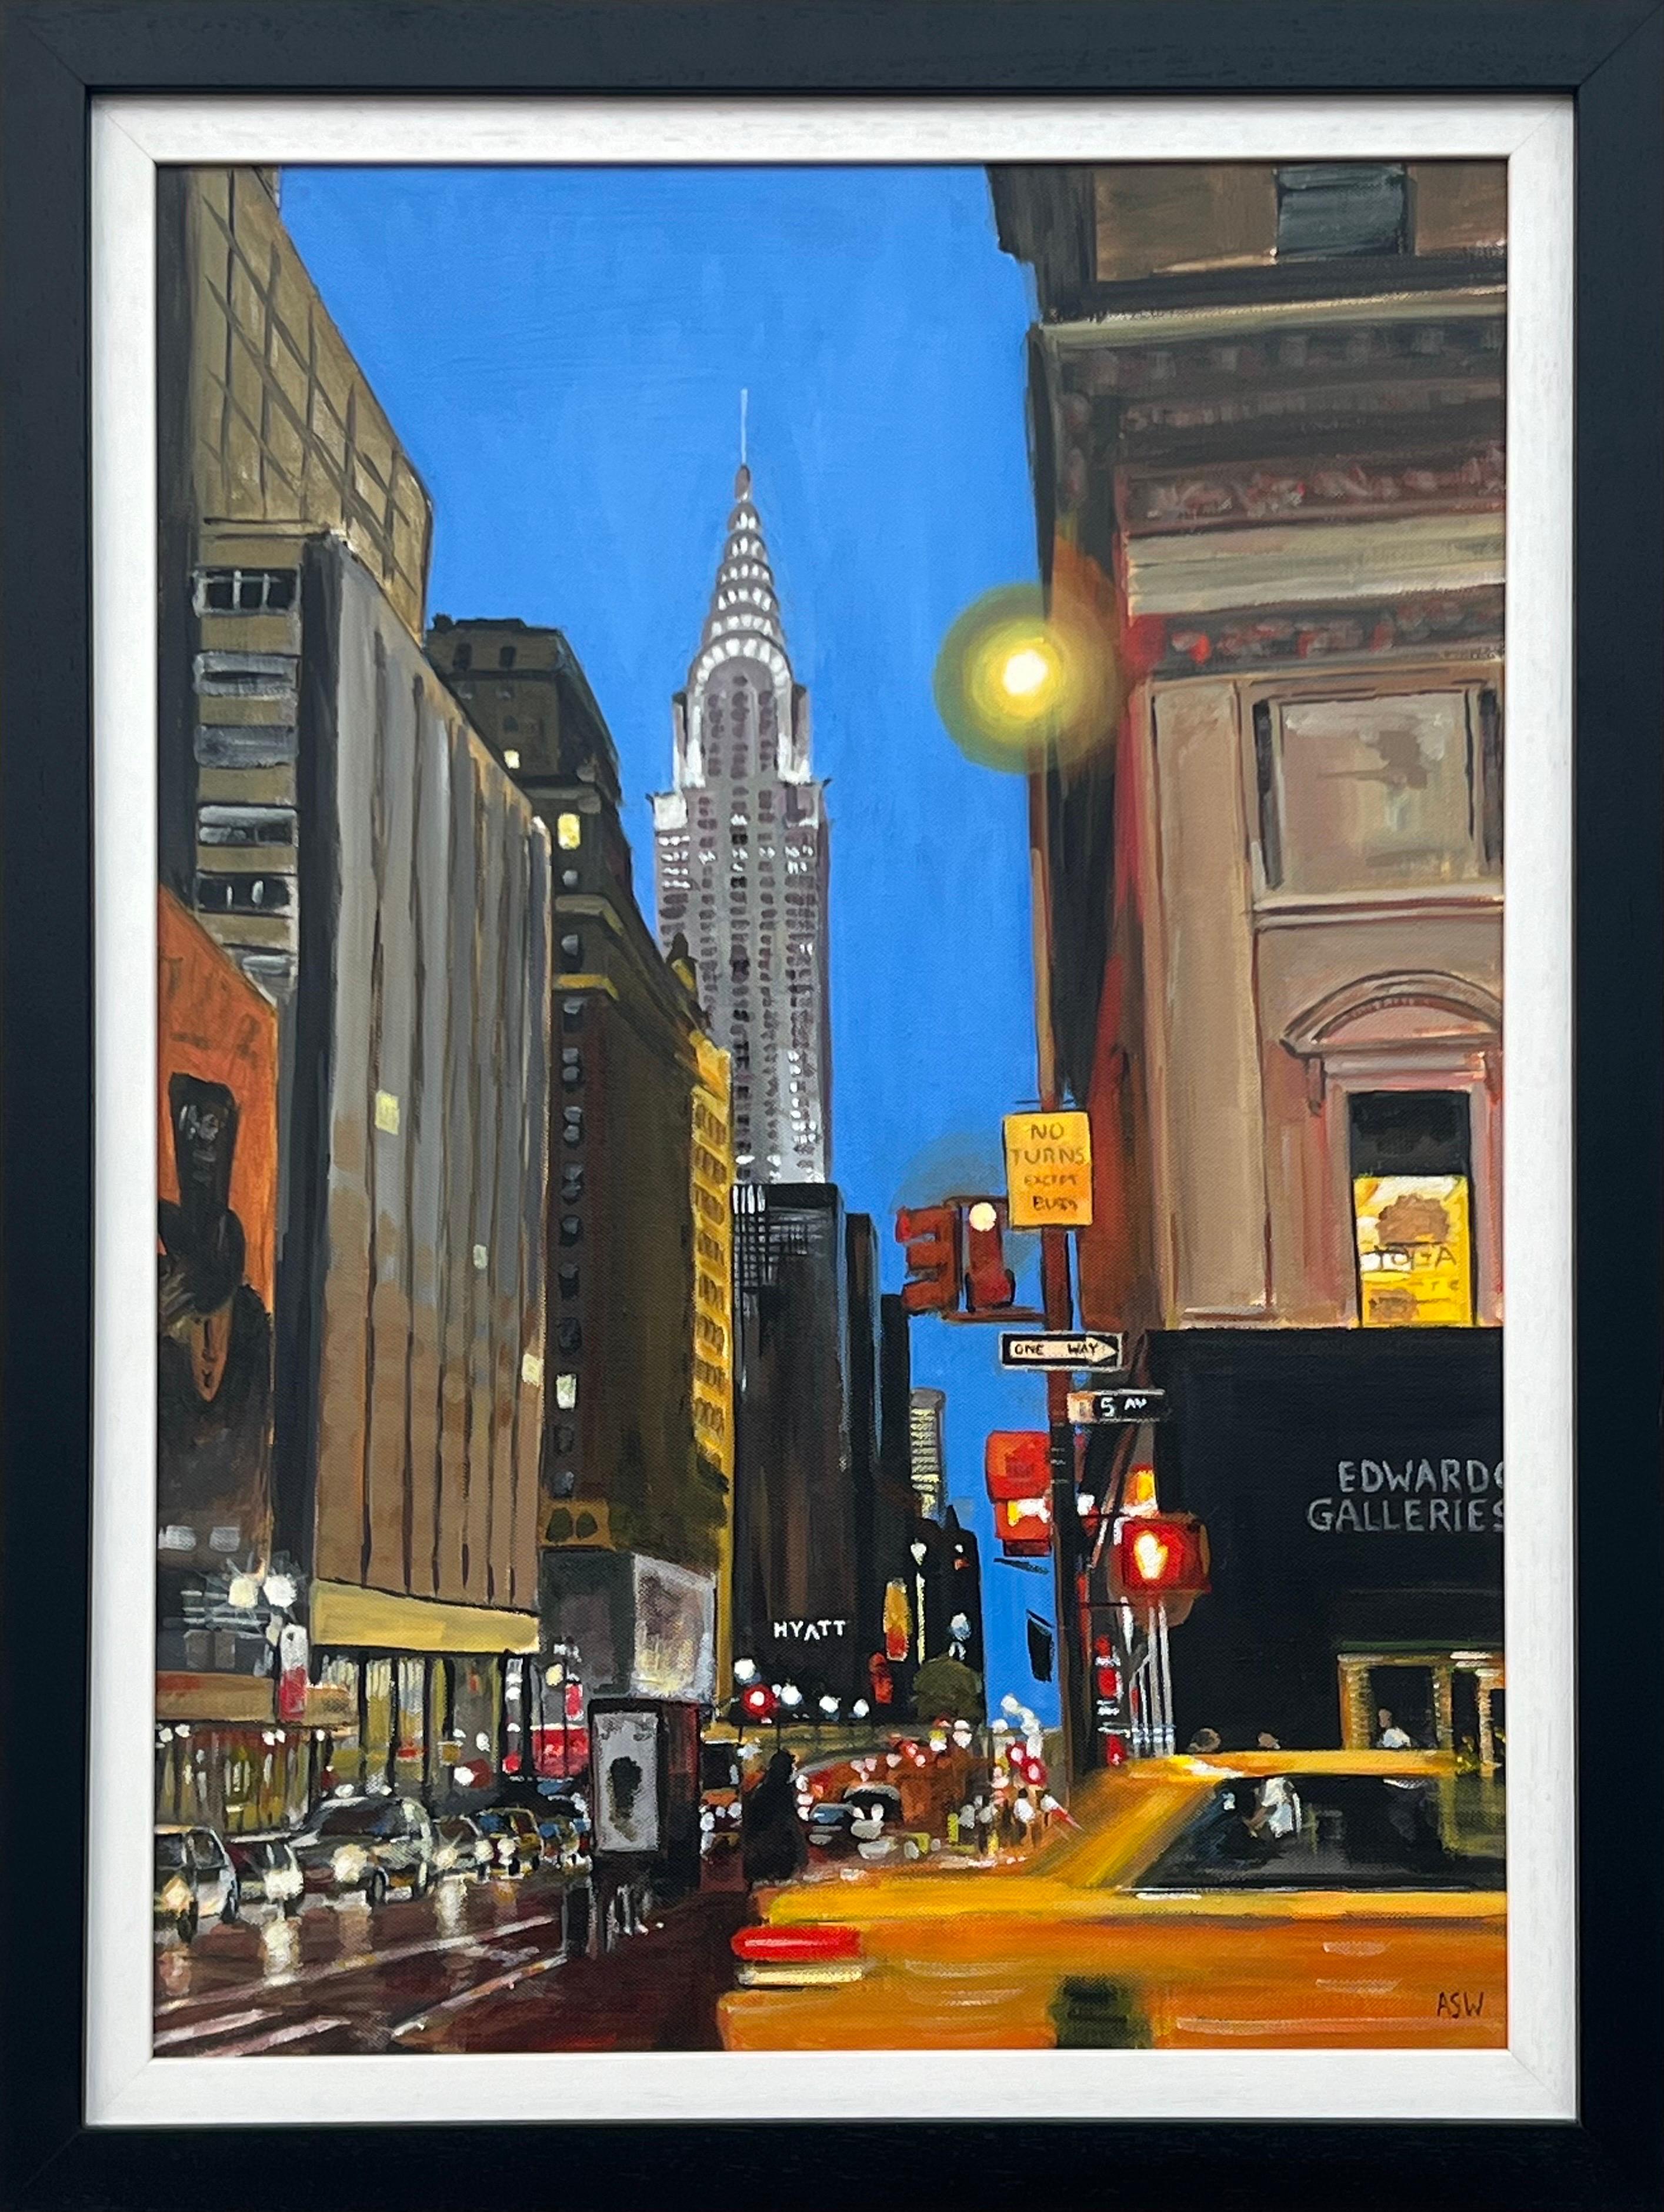 Chrysler Building Taxi Fifth Avenue New York City by Contemporary British Artist